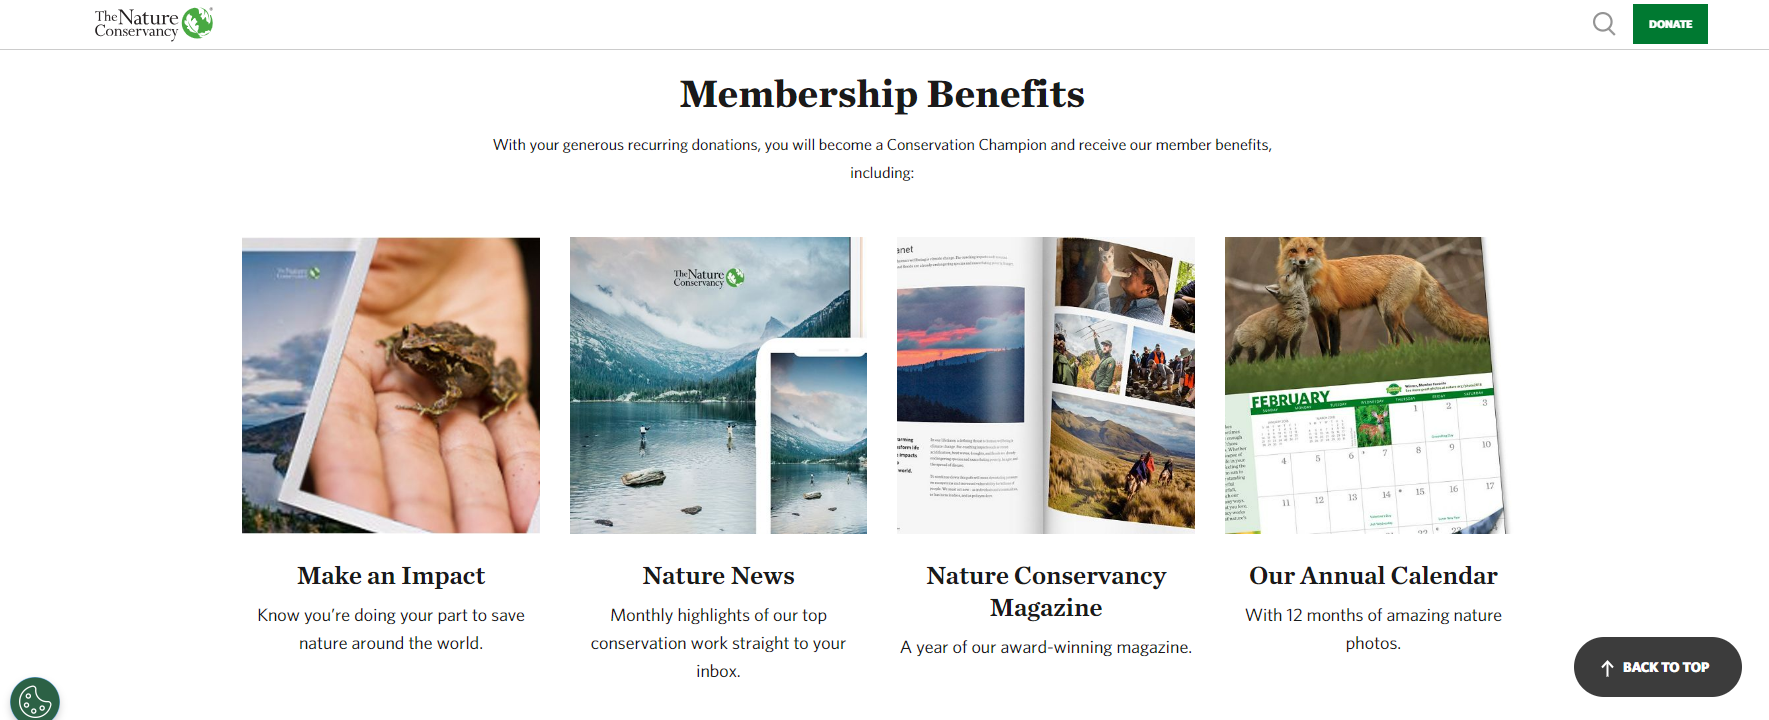 The Nature Conservancy’s monthly giving page, which details membership benefits for recurring donors.